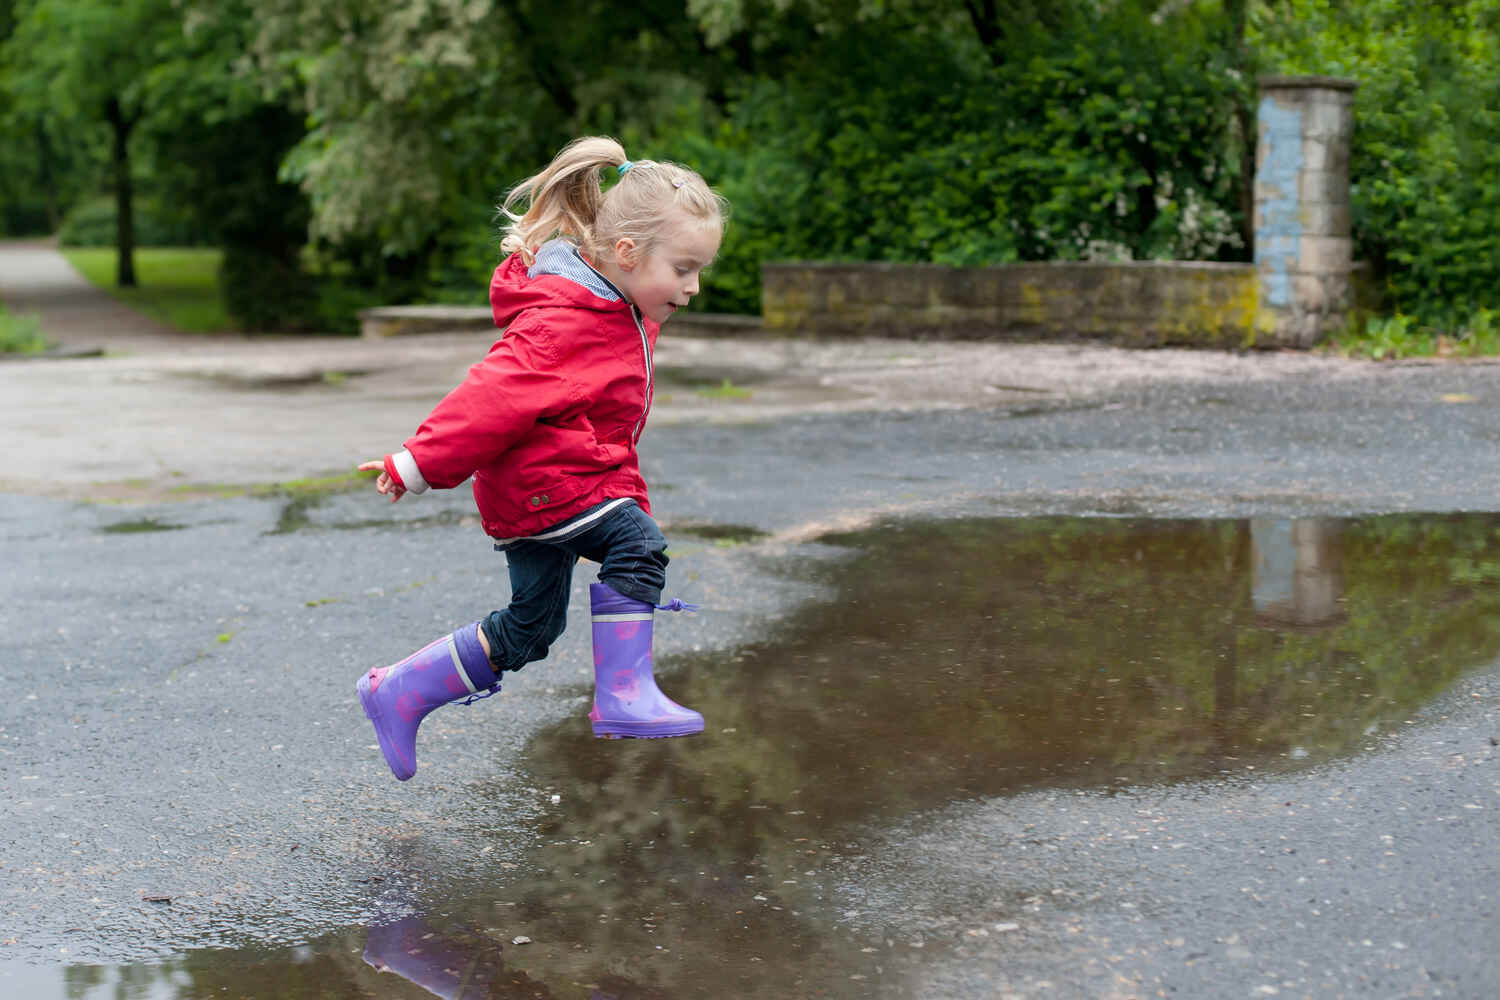 Little girl jumping in puddle